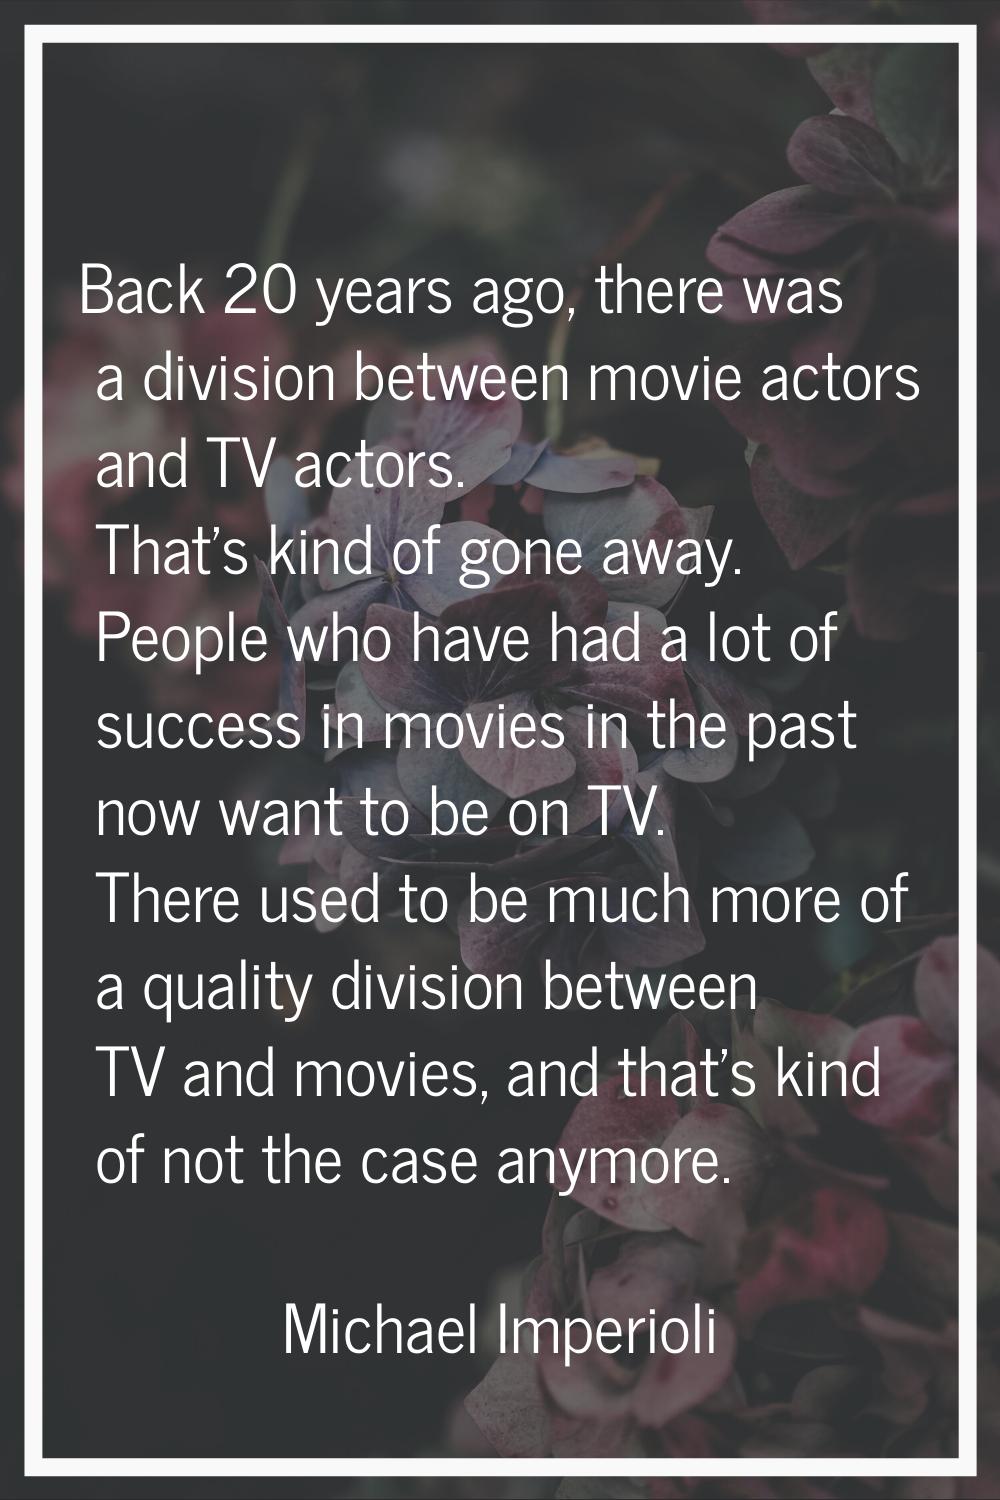 Back 20 years ago, there was a division between movie actors and TV actors. That's kind of gone awa